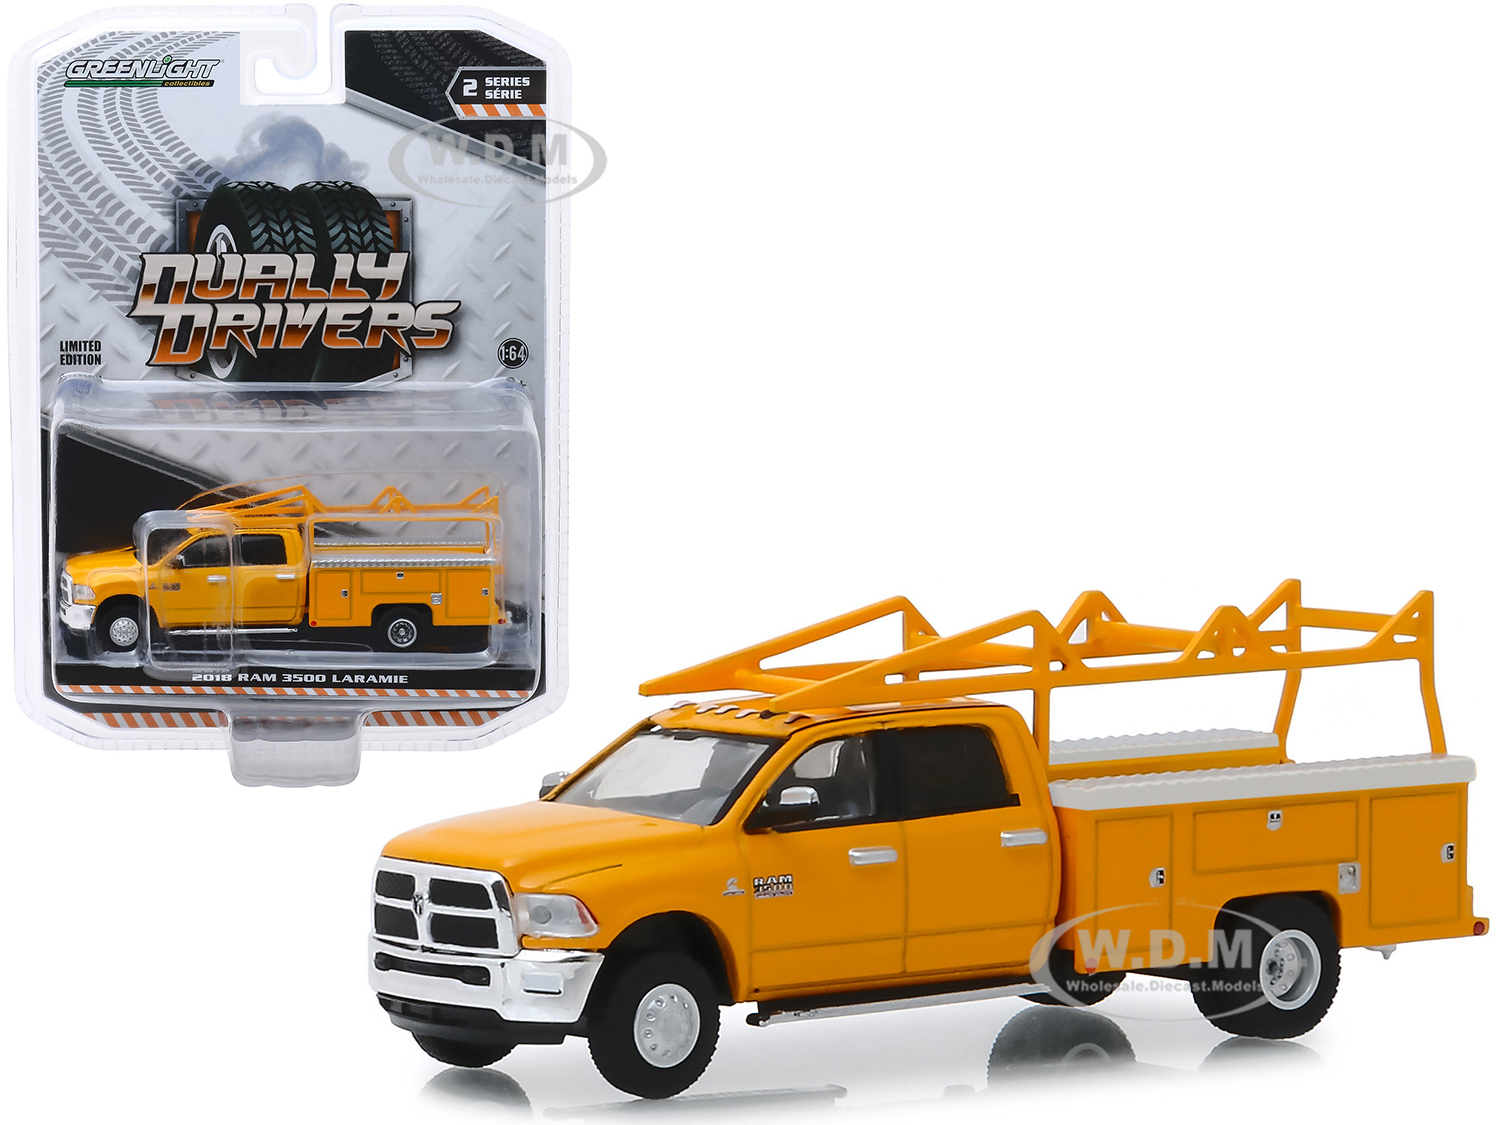 2018 Dodge Ram 3500 Laramie Service Bed Truck With Ladder Rack Yellow "dually Drivers" Series 2 1/64 Diecast Model Car By Greenlight